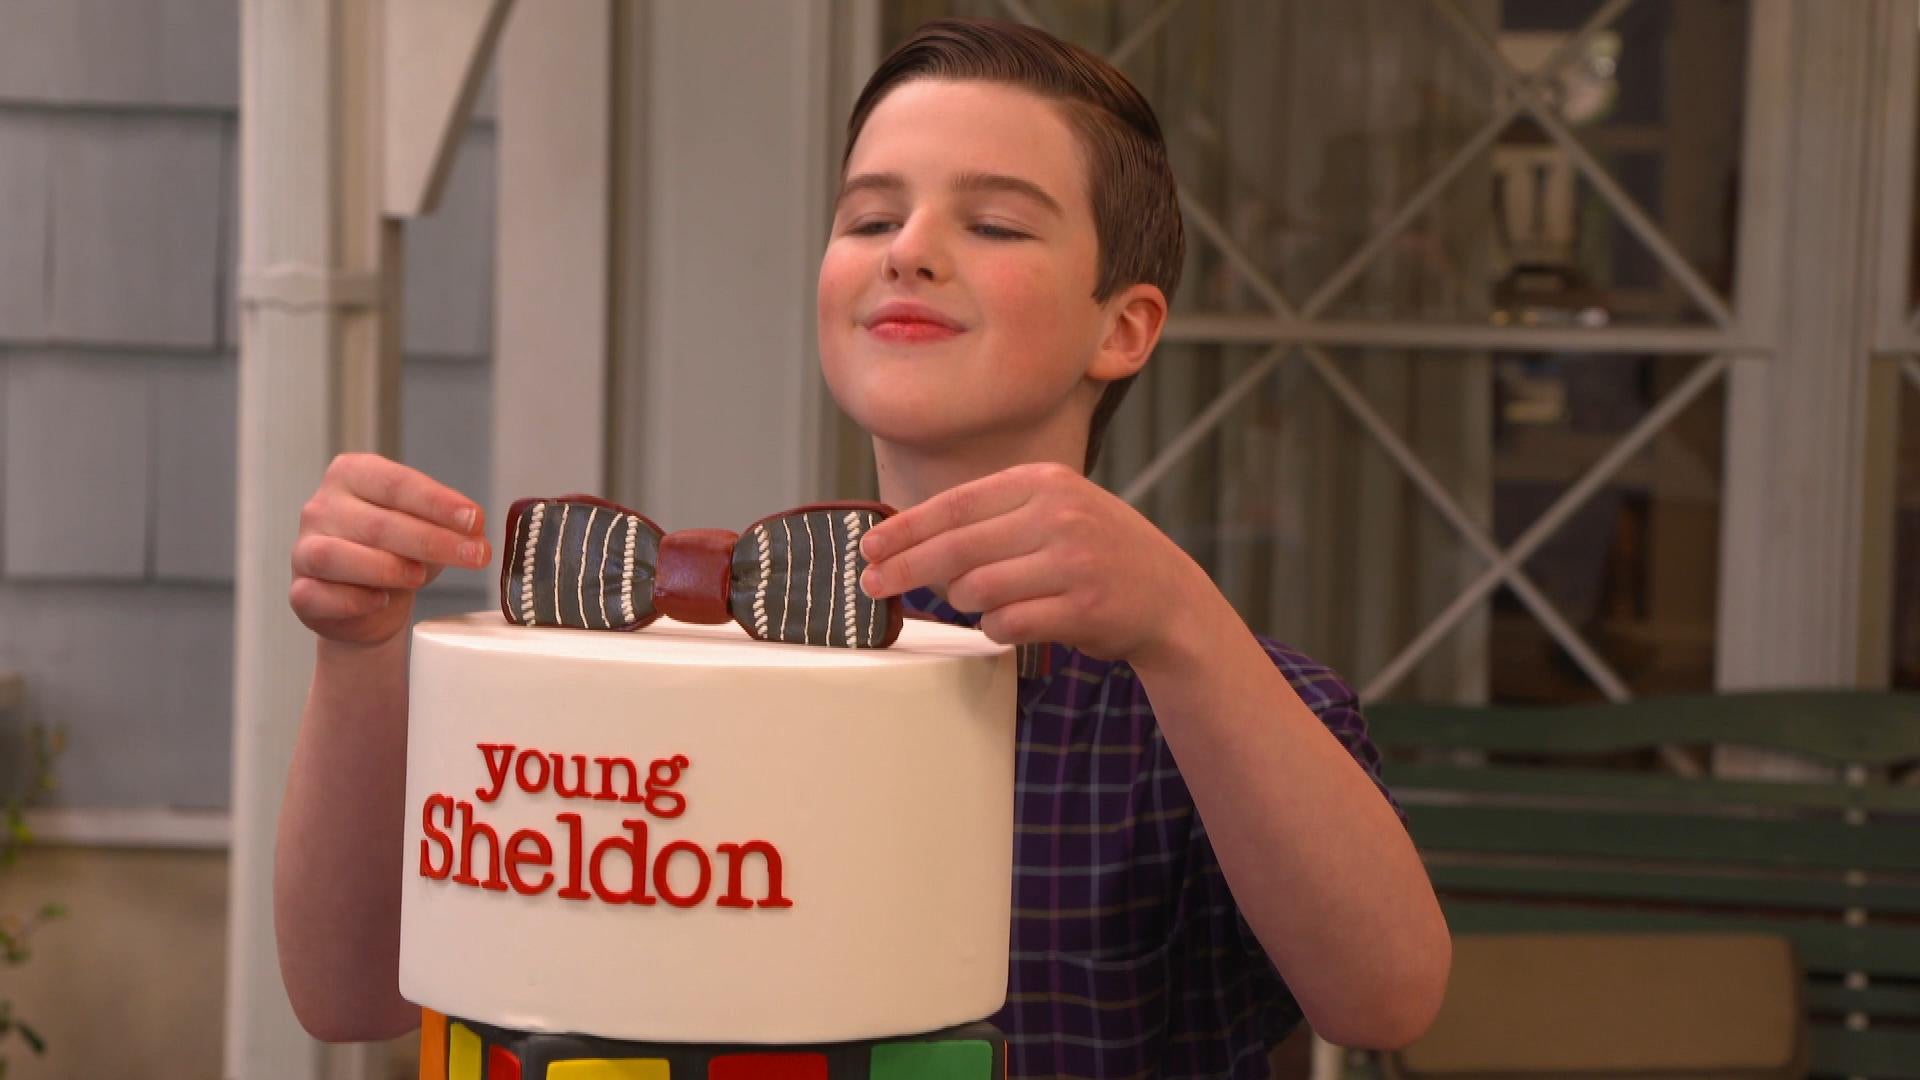 Young Sheldon' Last Episode Shows Surprising Things About Sheldon's Future